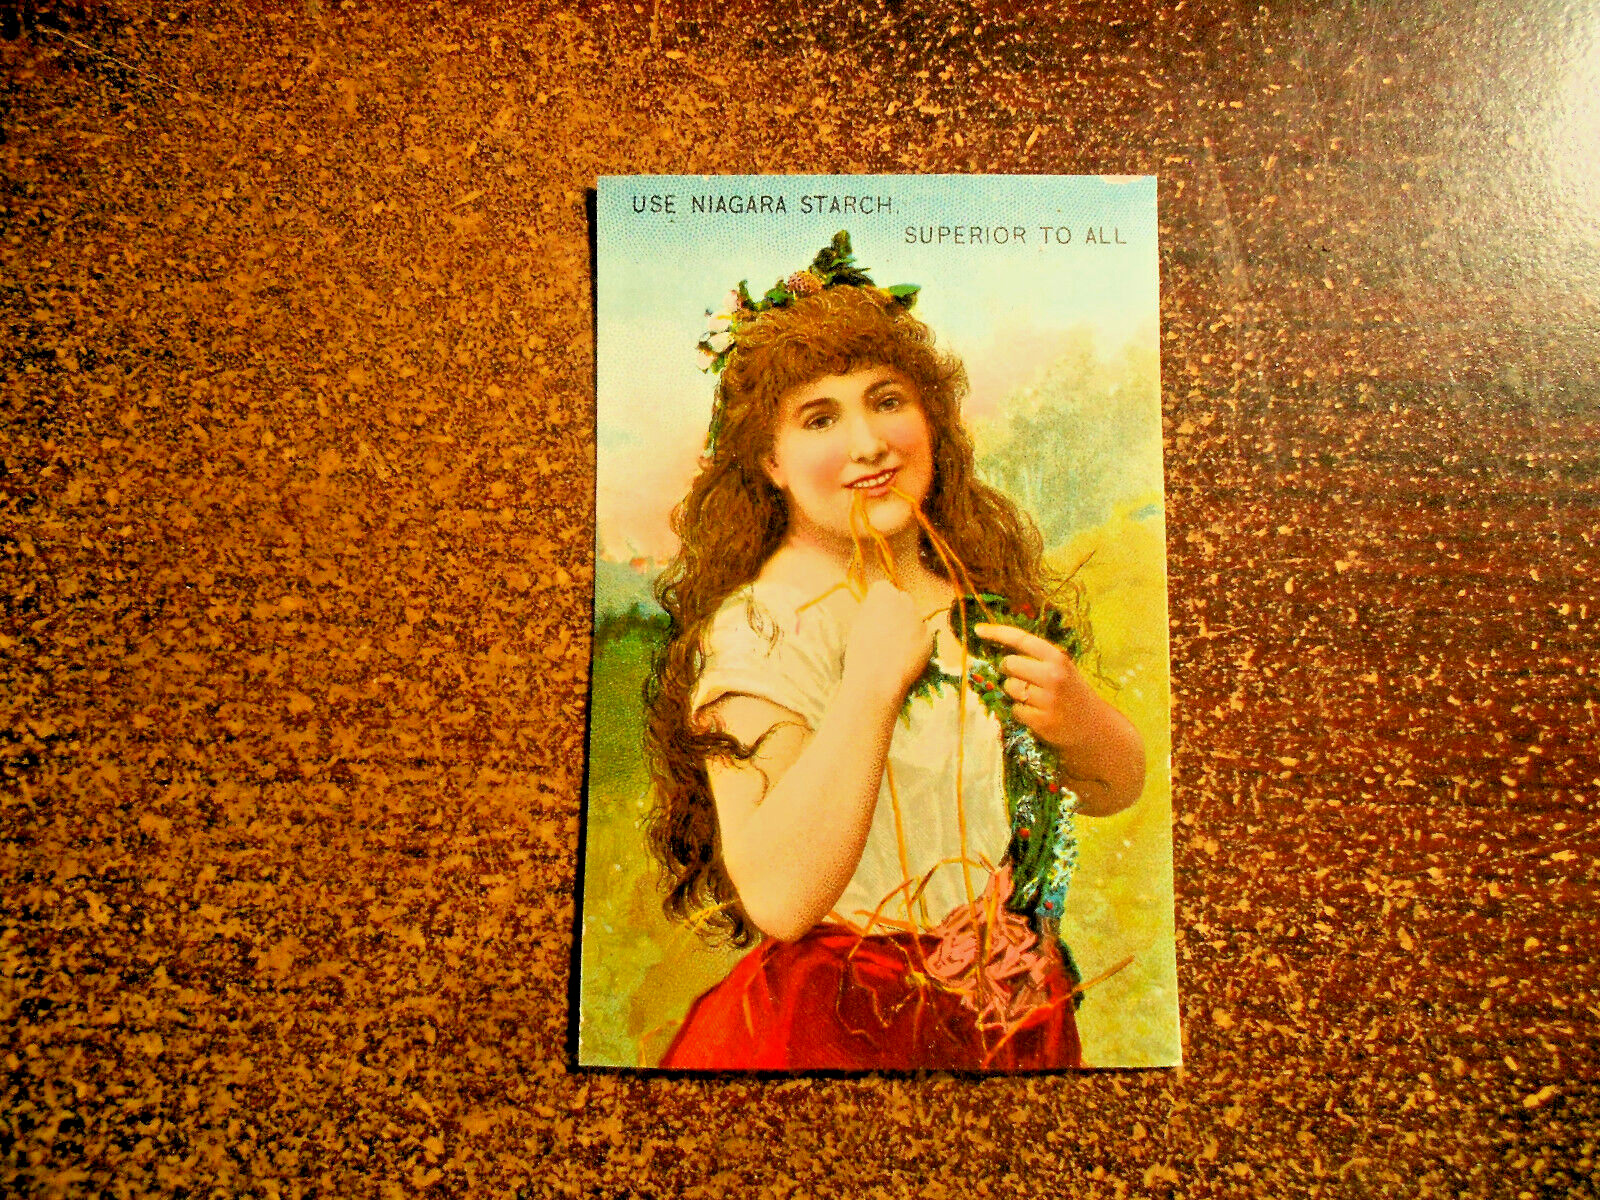 USE NIAGARA STARCH TRADE CARD SUPERIOR TO ALL GIRL WITH LONG HAIR